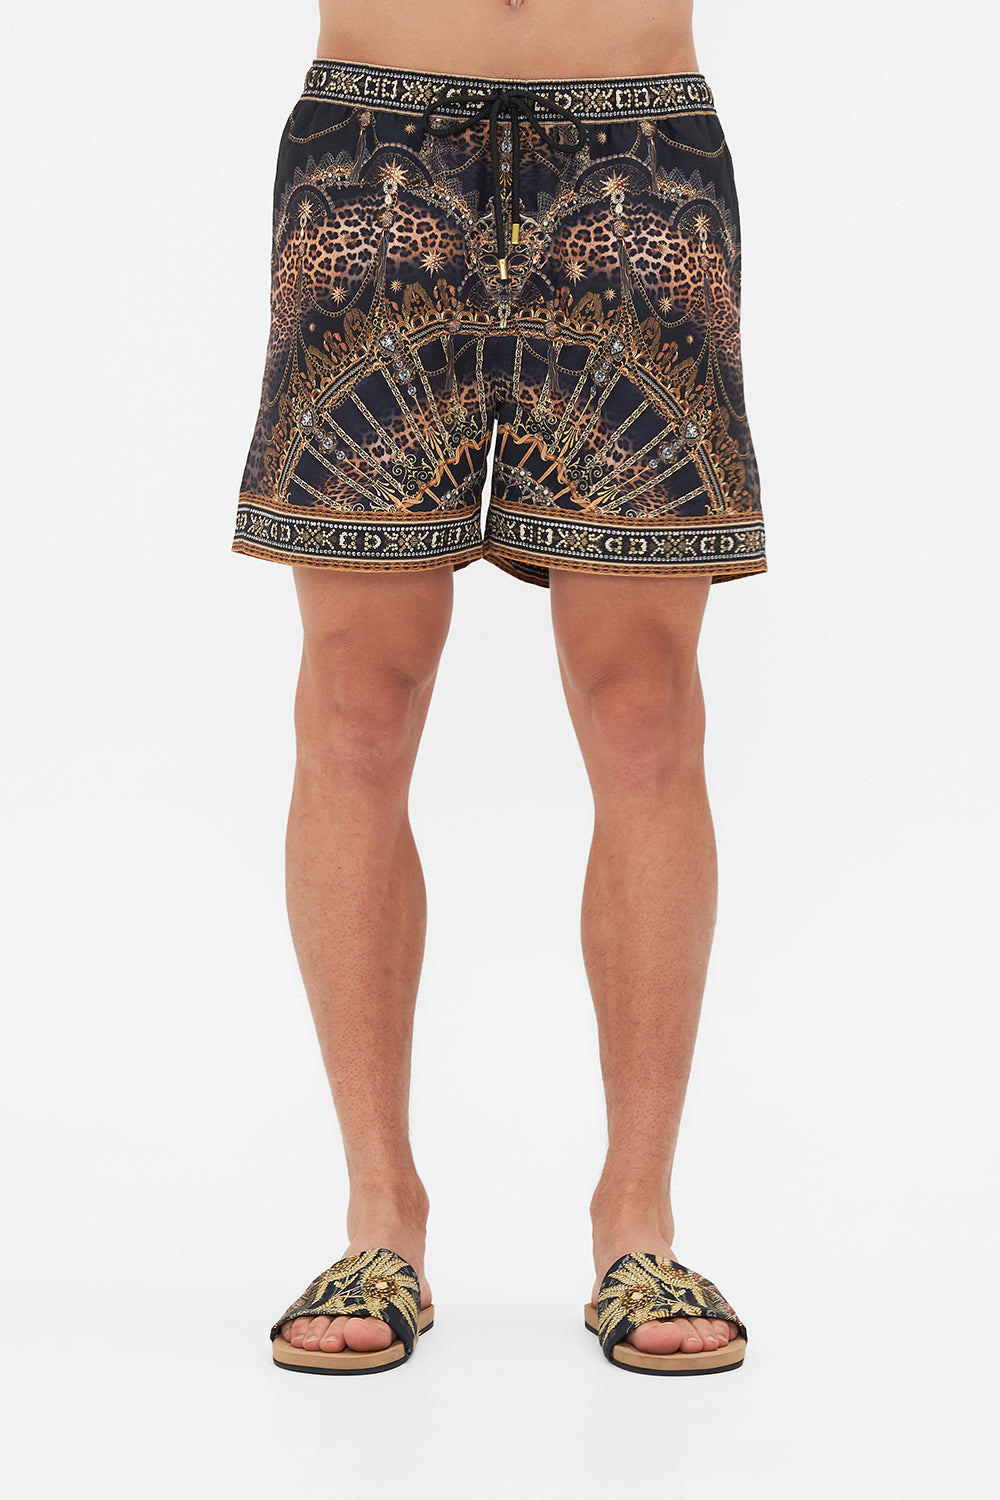 Crop view of model wearing hotel franks By CAMILLA mens boardshort in Masked At Moonlight print